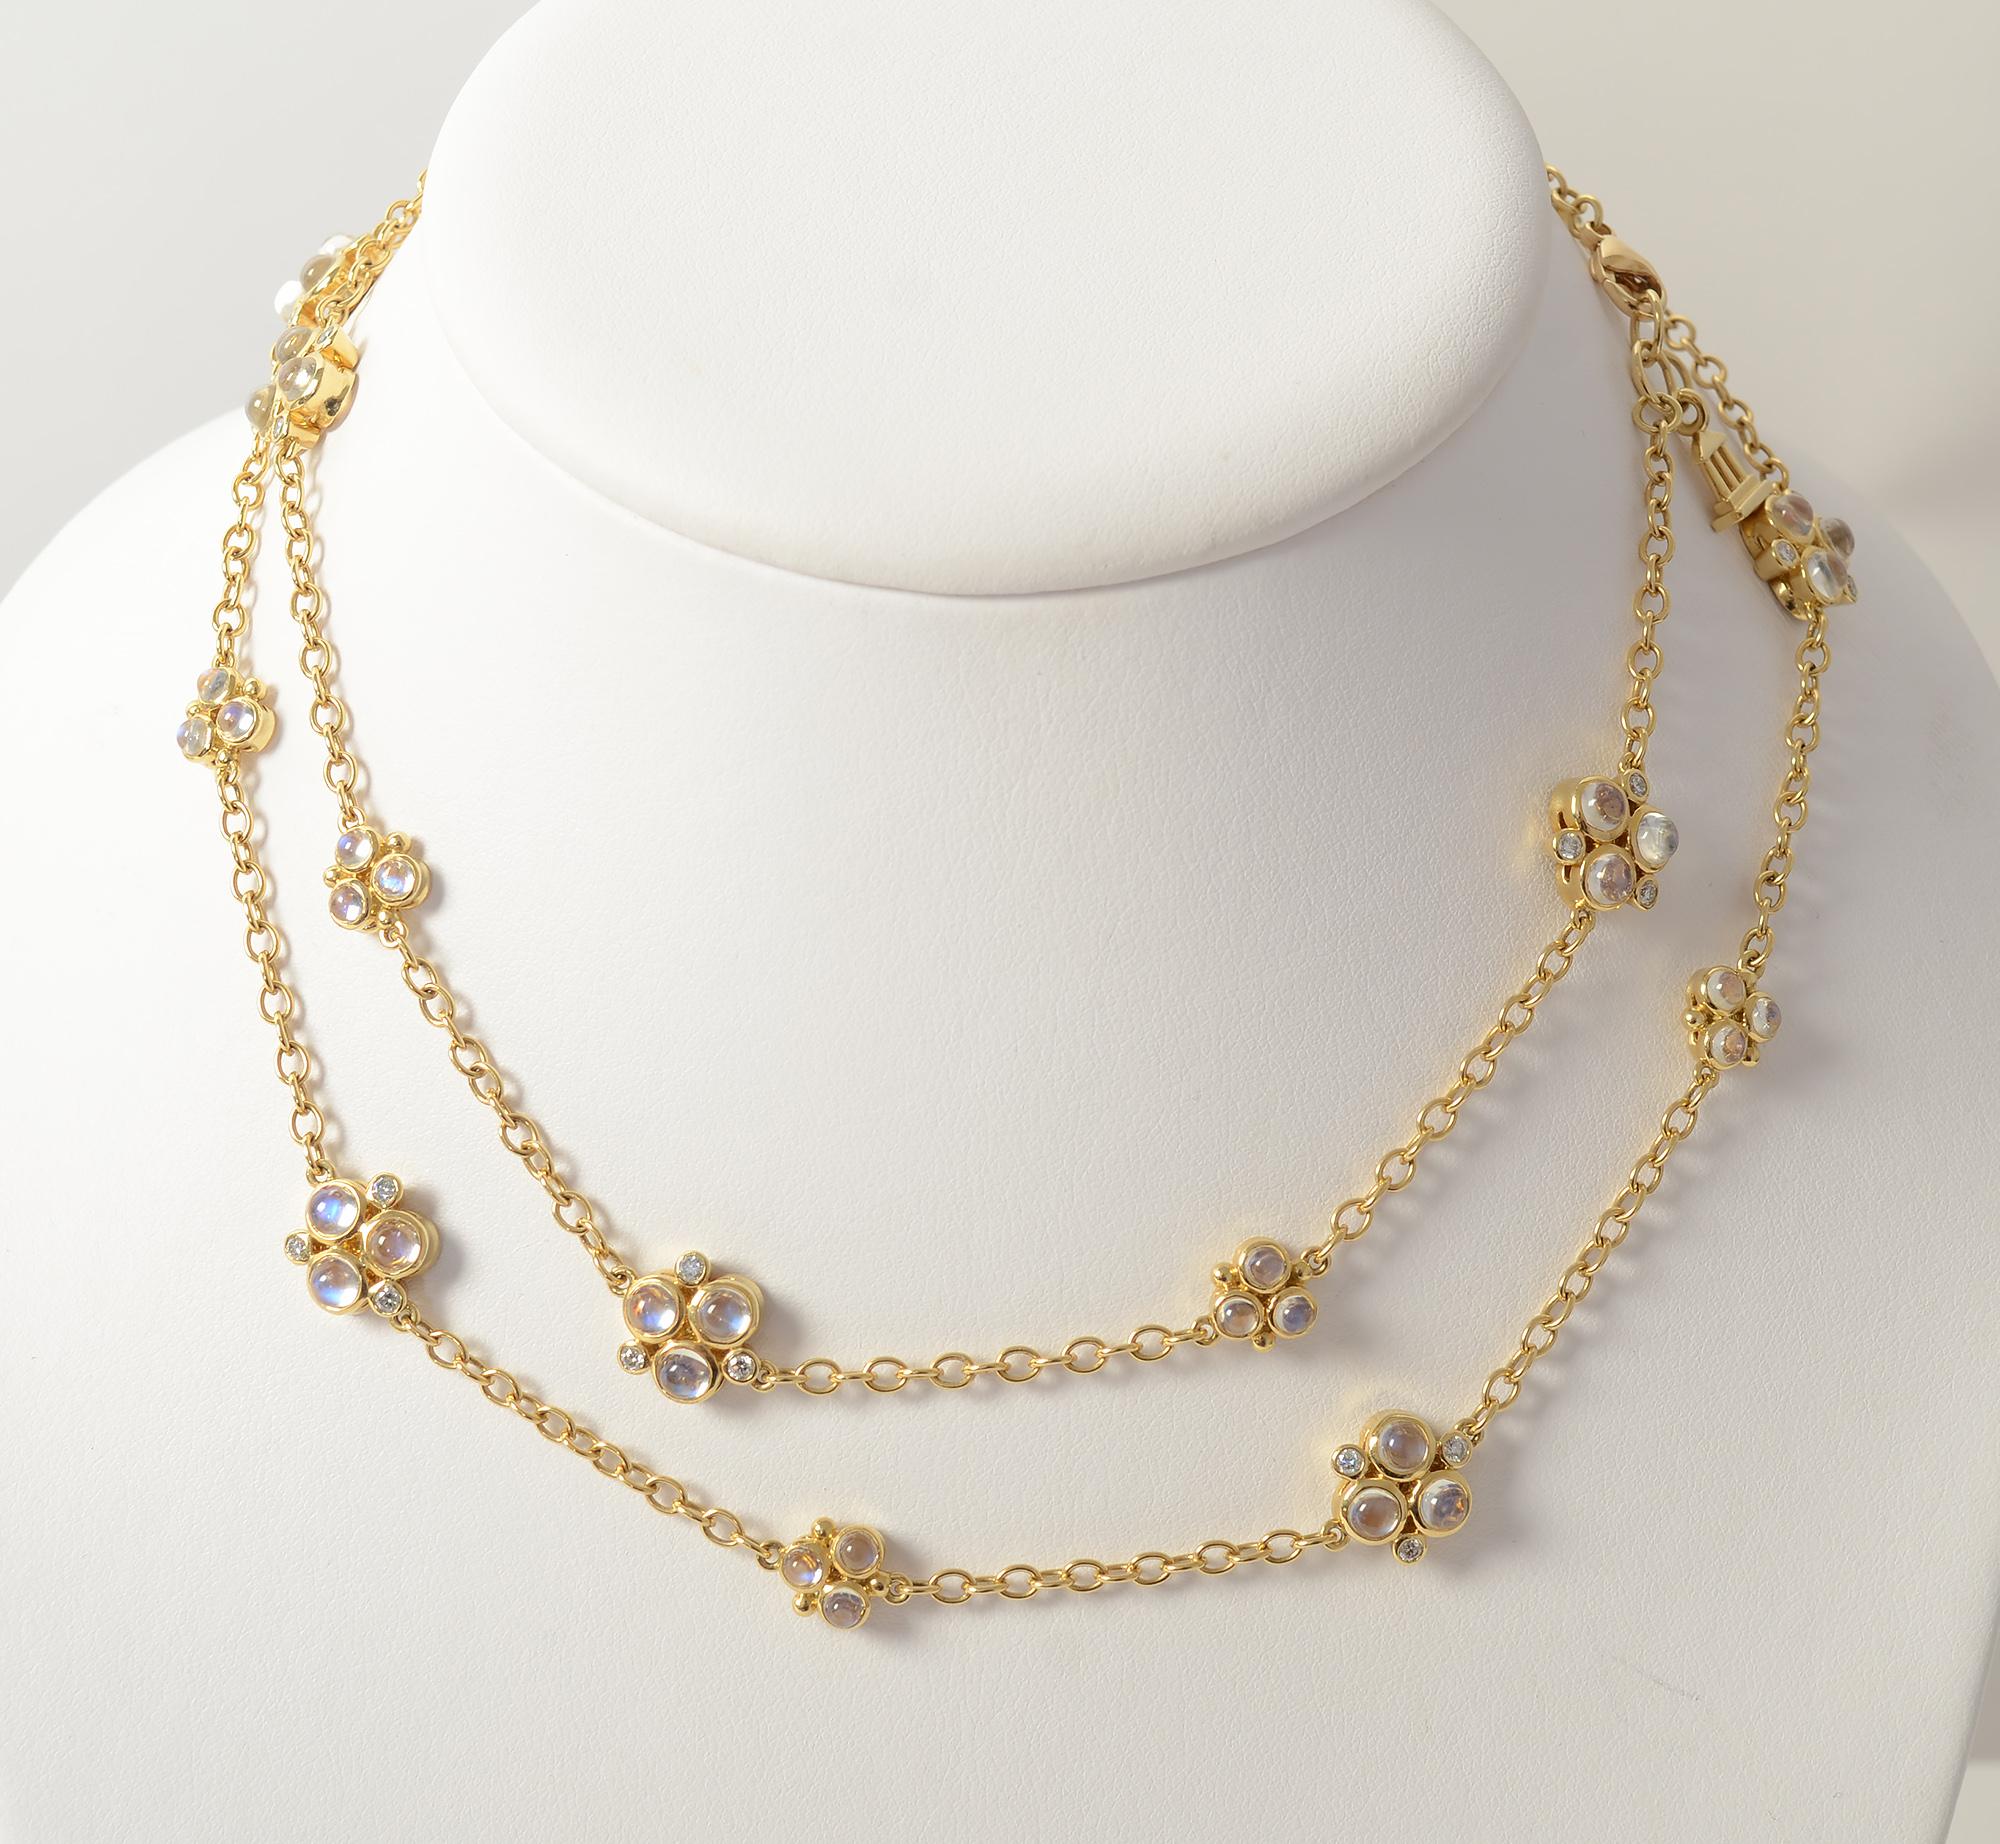 Brilliant Cut Temple St. Clair Diamond and Moonstone Long Chain Necklace